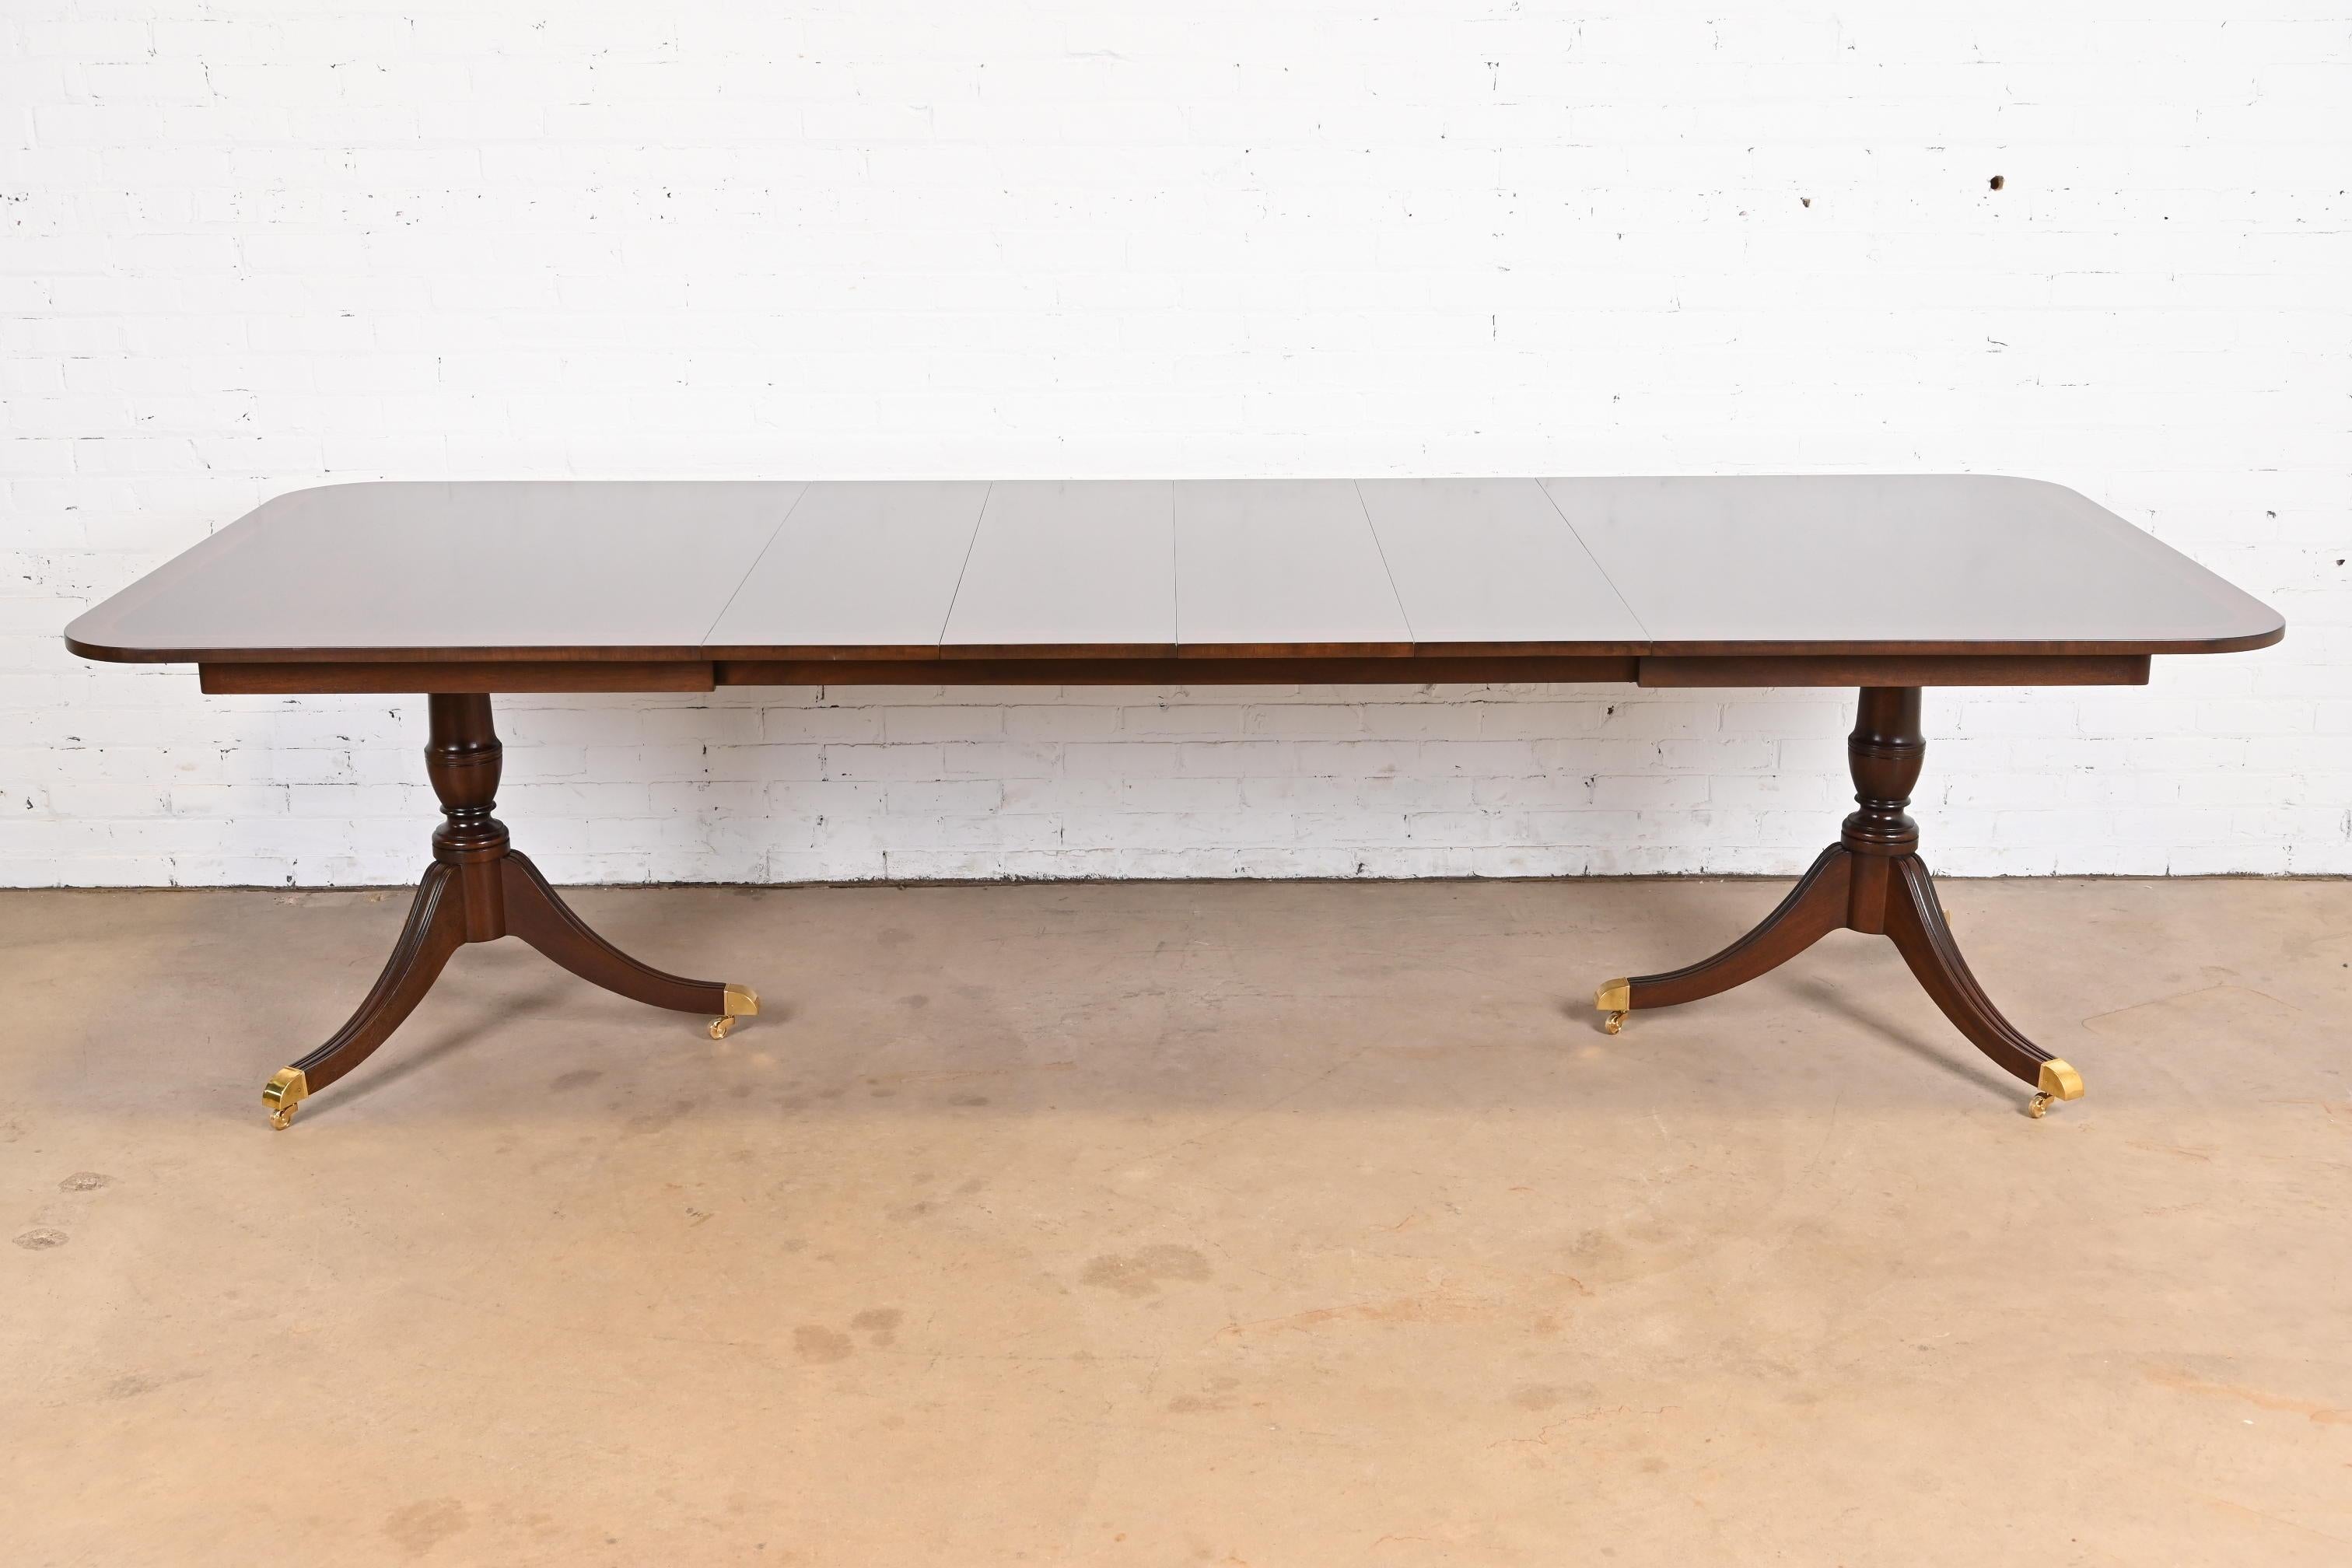 An exceptional Georgian or Regency style double pedestal extension dining table

By Kindel Furniture

USA, Circa 1980s

Book-matched mahogany, with inlaid satinwood banding, carved solid mahogany pedestals, brass-capped feet, and brass